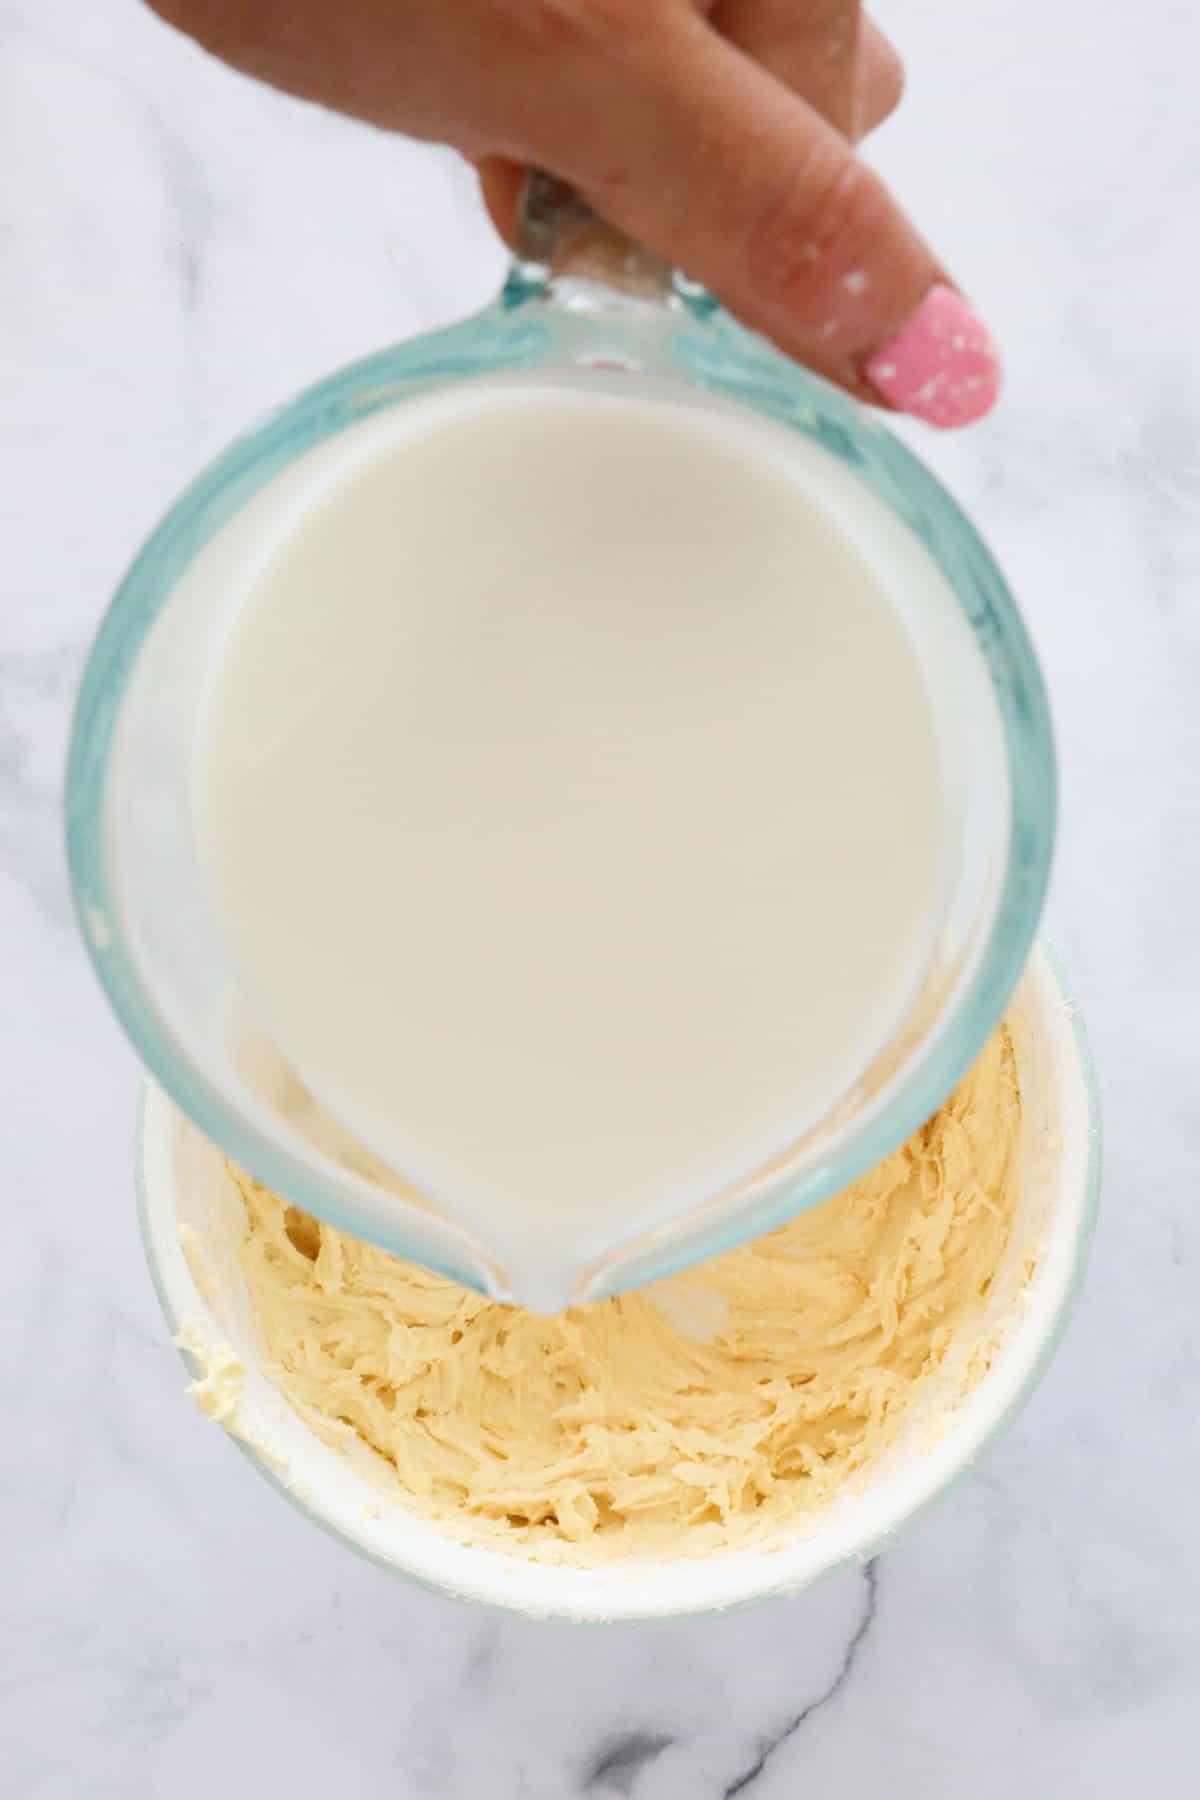 A jug of milk being poured into the batter.